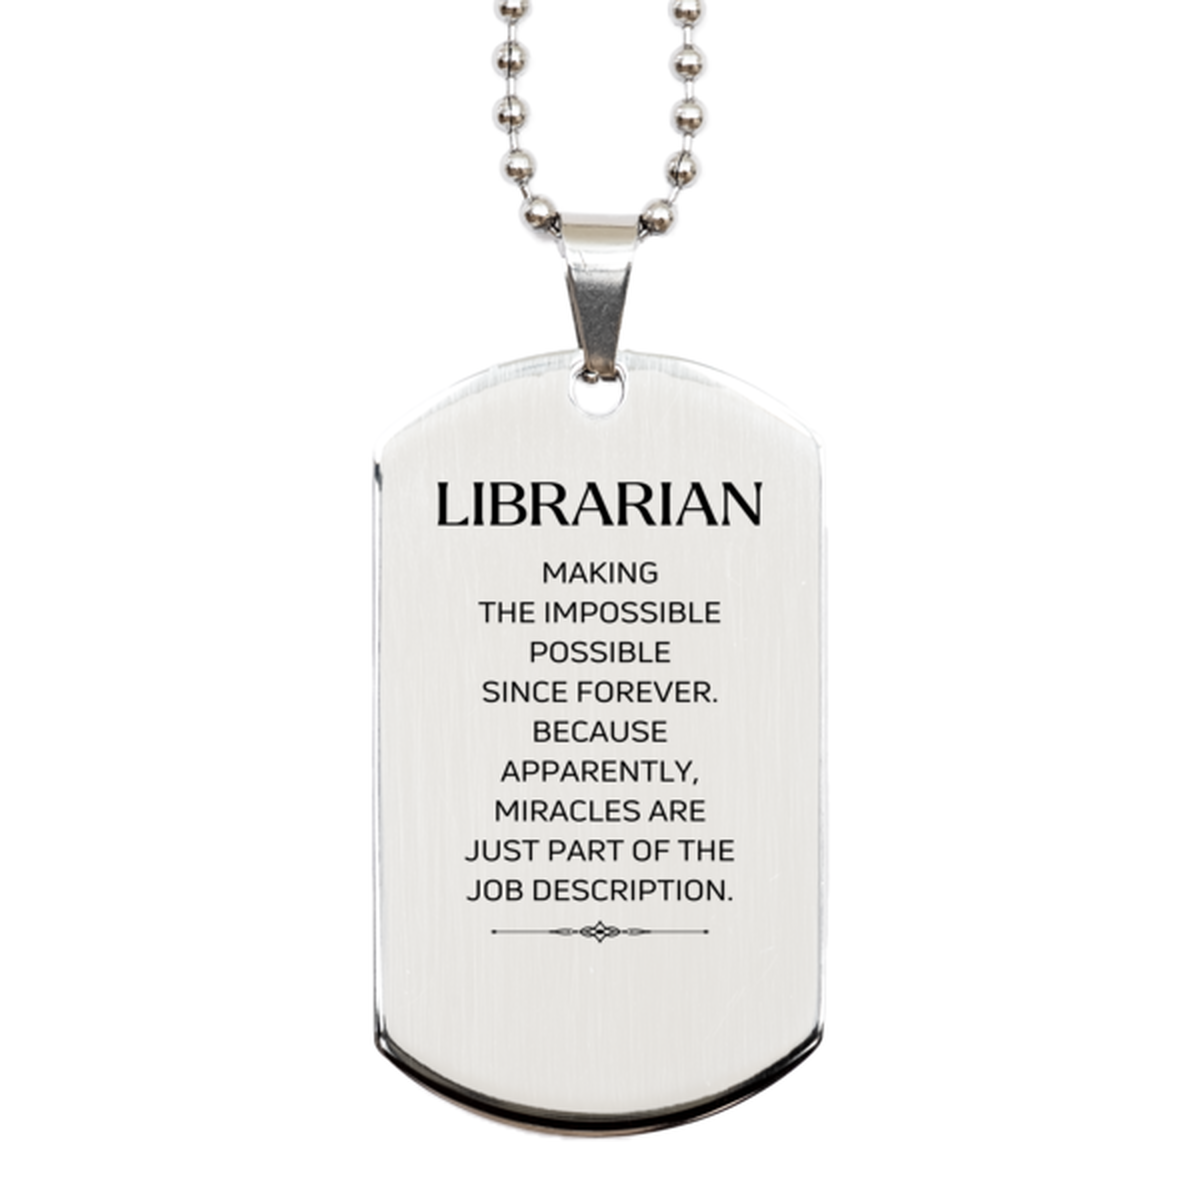 Funny Librarian Gifts, Miracles are just part of the job description, Inspirational Birthday Silver Dog Tag For Librarian, Men, Women, Coworkers, Friends, Boss